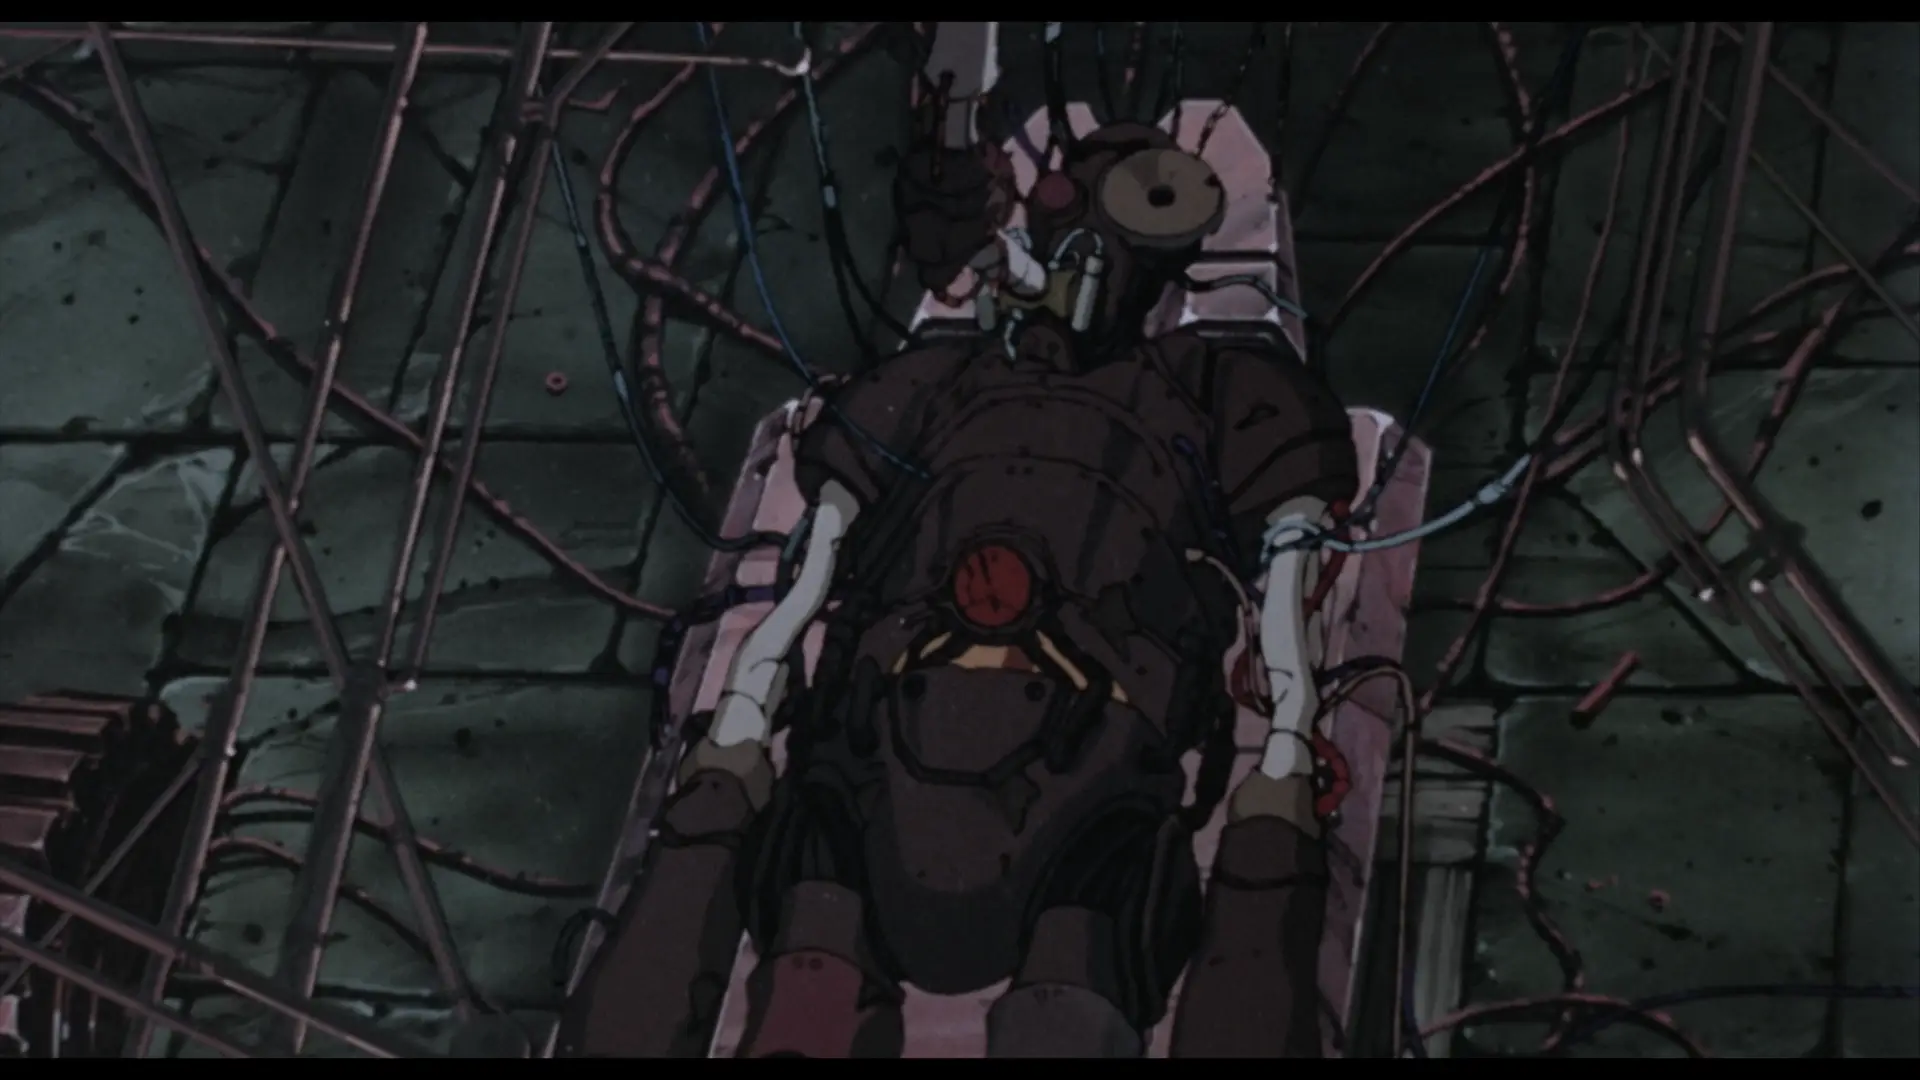 Still from Franken's Gears. The robot lies on its back, surrounded by pipes and wires, some of which connect to the robot itself and others running along the floor. Its shell is mostly brown metal, but its arms are white, with a split pattern resembling bone.